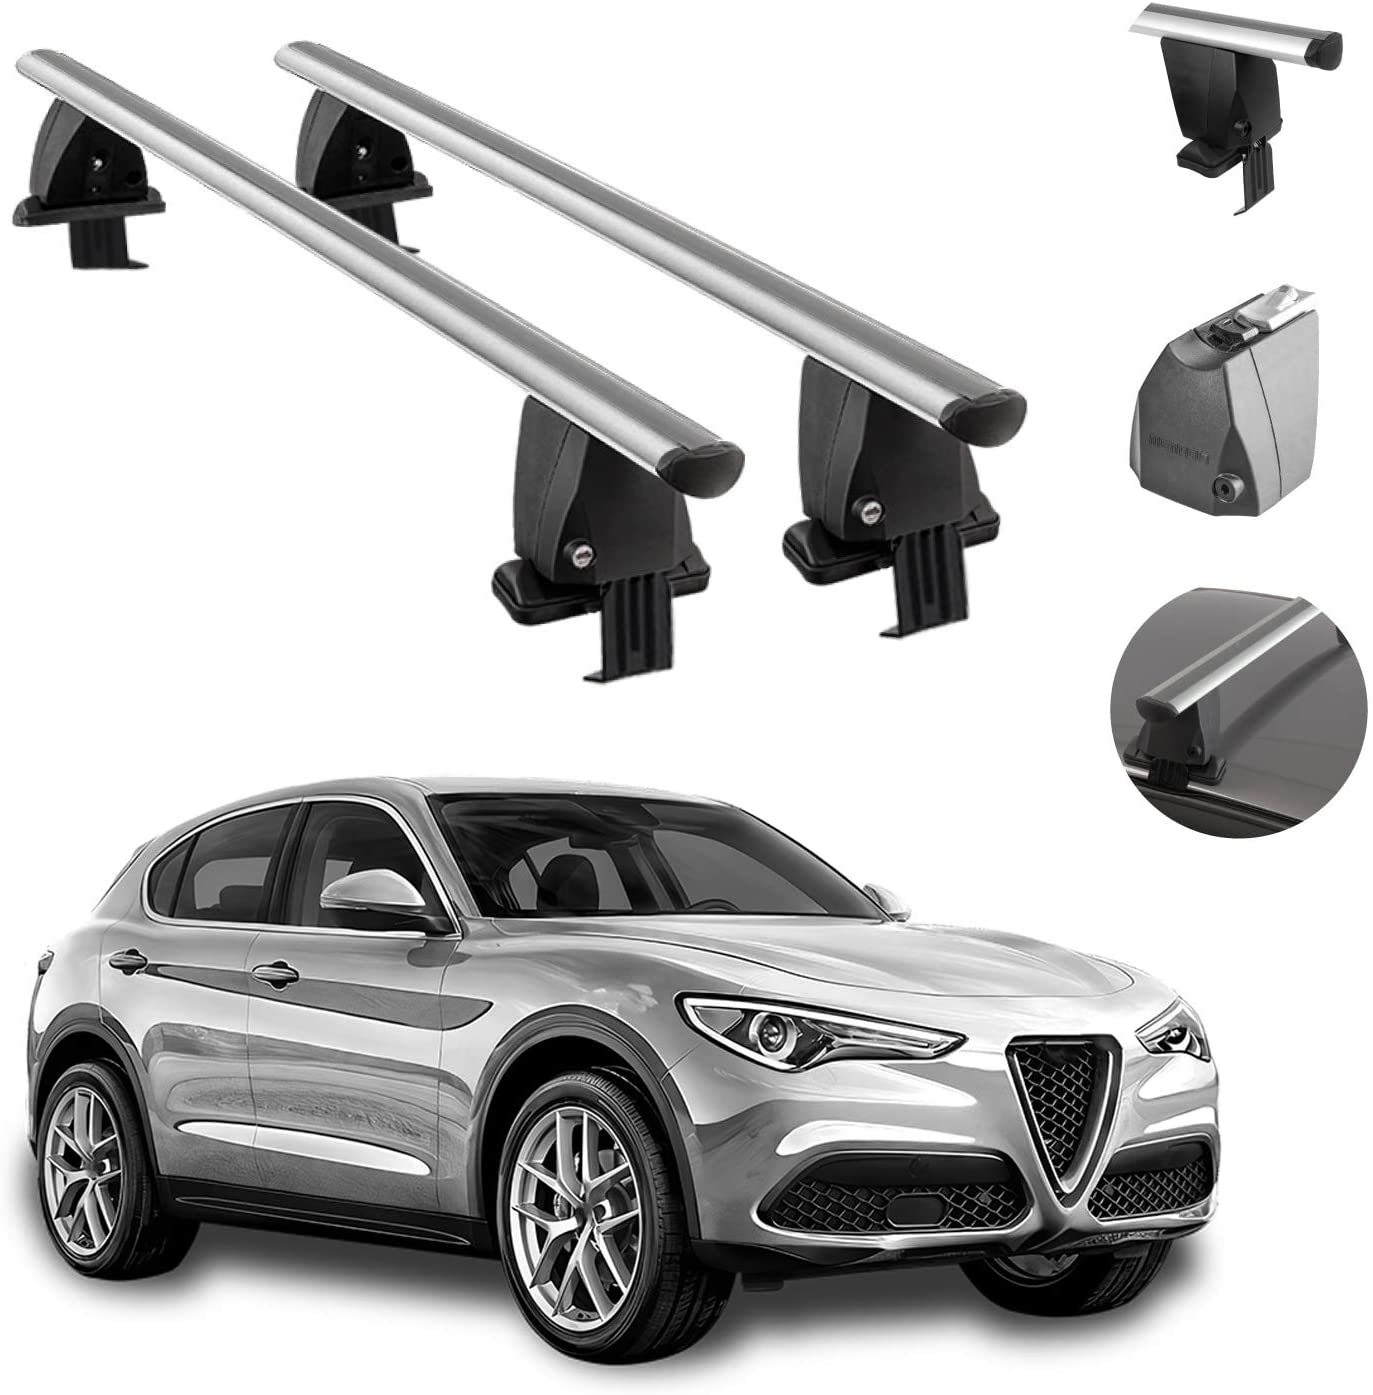 Roof Rack Cross Bars Lockable Luggage Carrier Compatible with Smooth Roof Cars | Silver Aluminum Cargo Carrier Rooftop Luggage Bars | Automotive Exterior Accessories Fits Alfa Romeo Stelvio 2017-2021